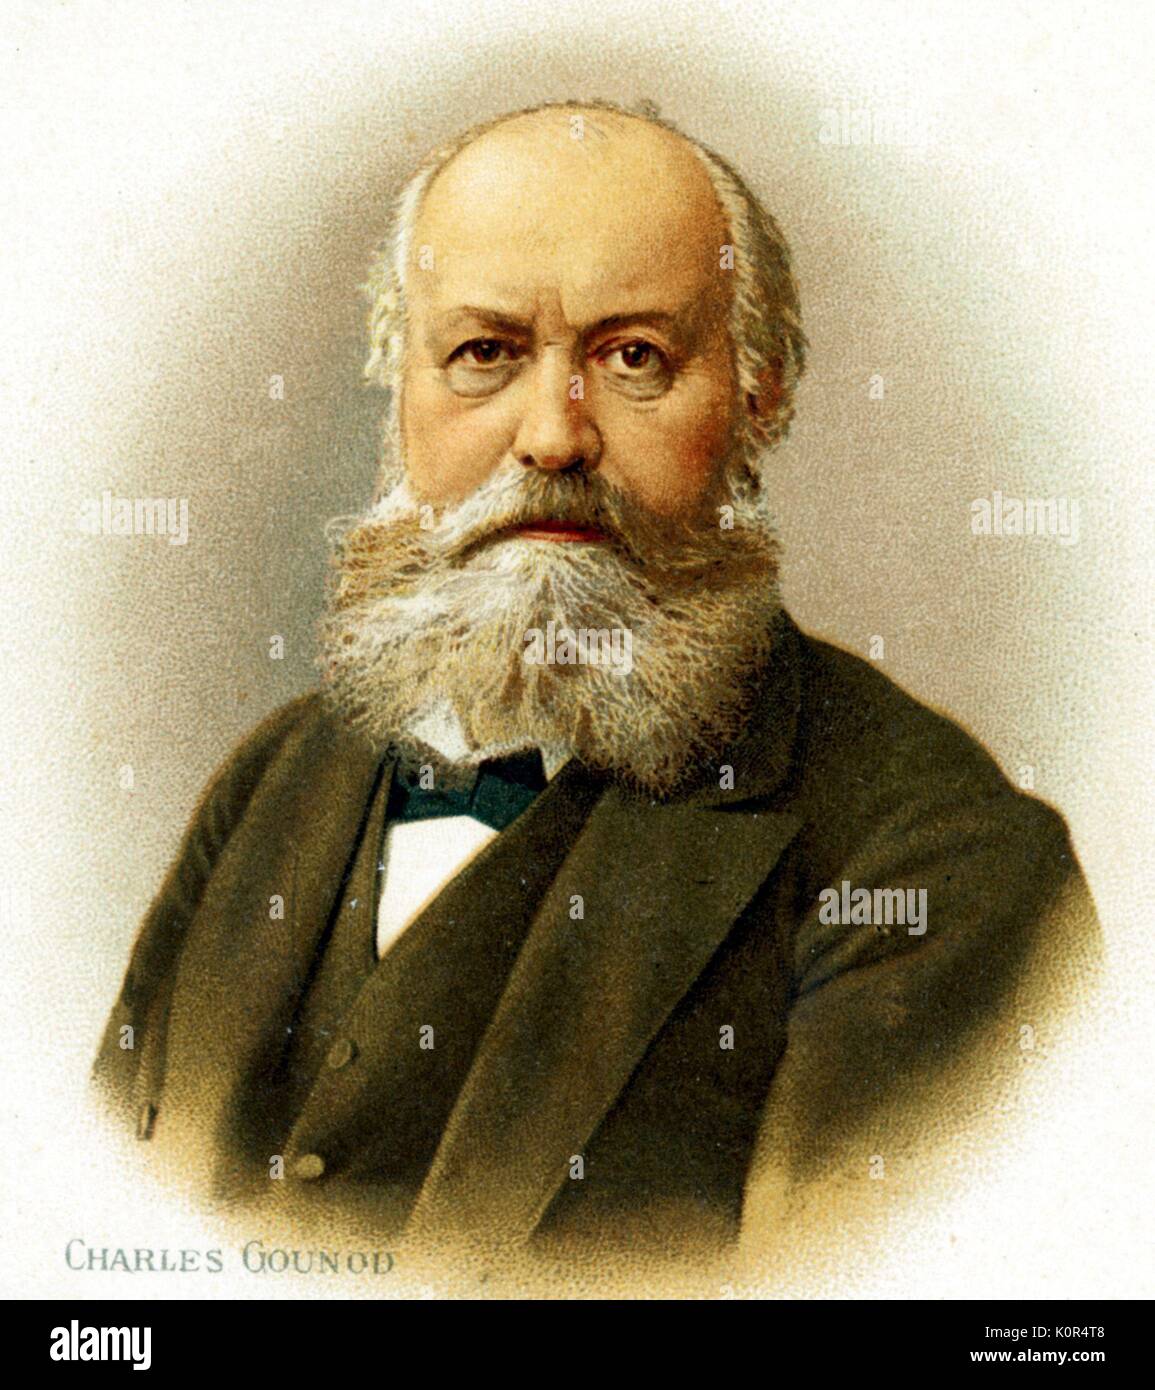 Charles Gounod -  portrait. French composer 1818-1893. Stock Photo